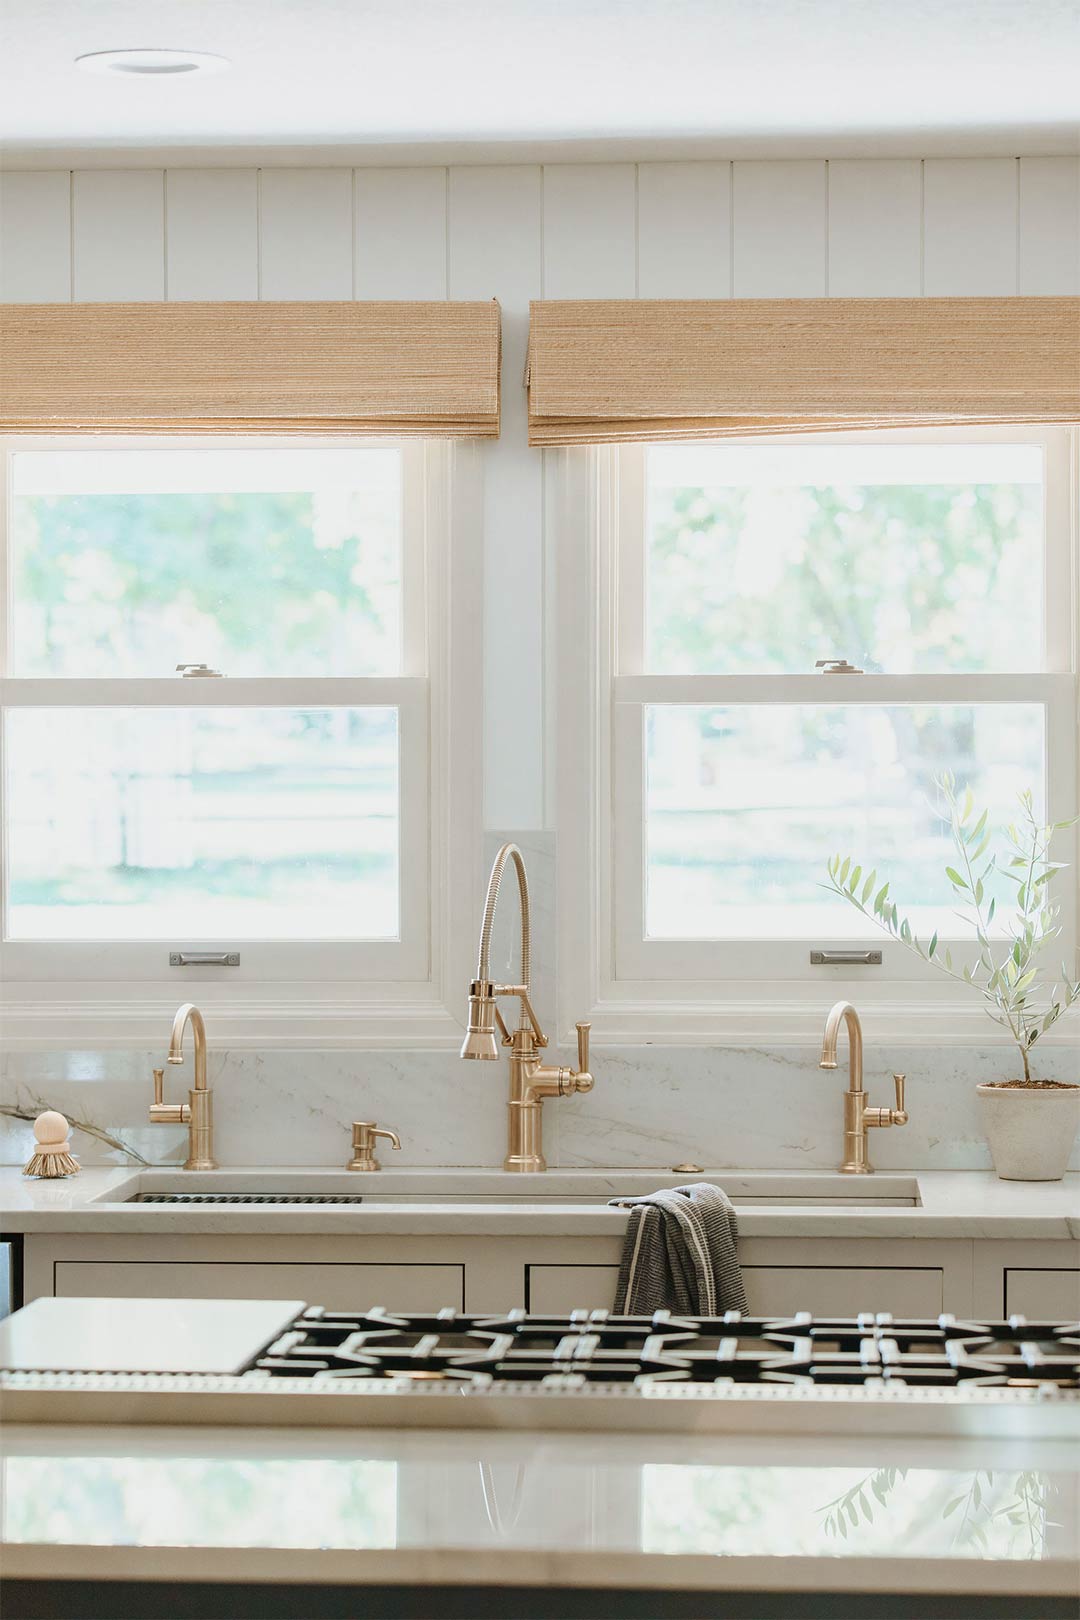 Brizo Artesso Faucet in Luxe Gold takes center stage in this bright and airy modern farmhouse kitchen